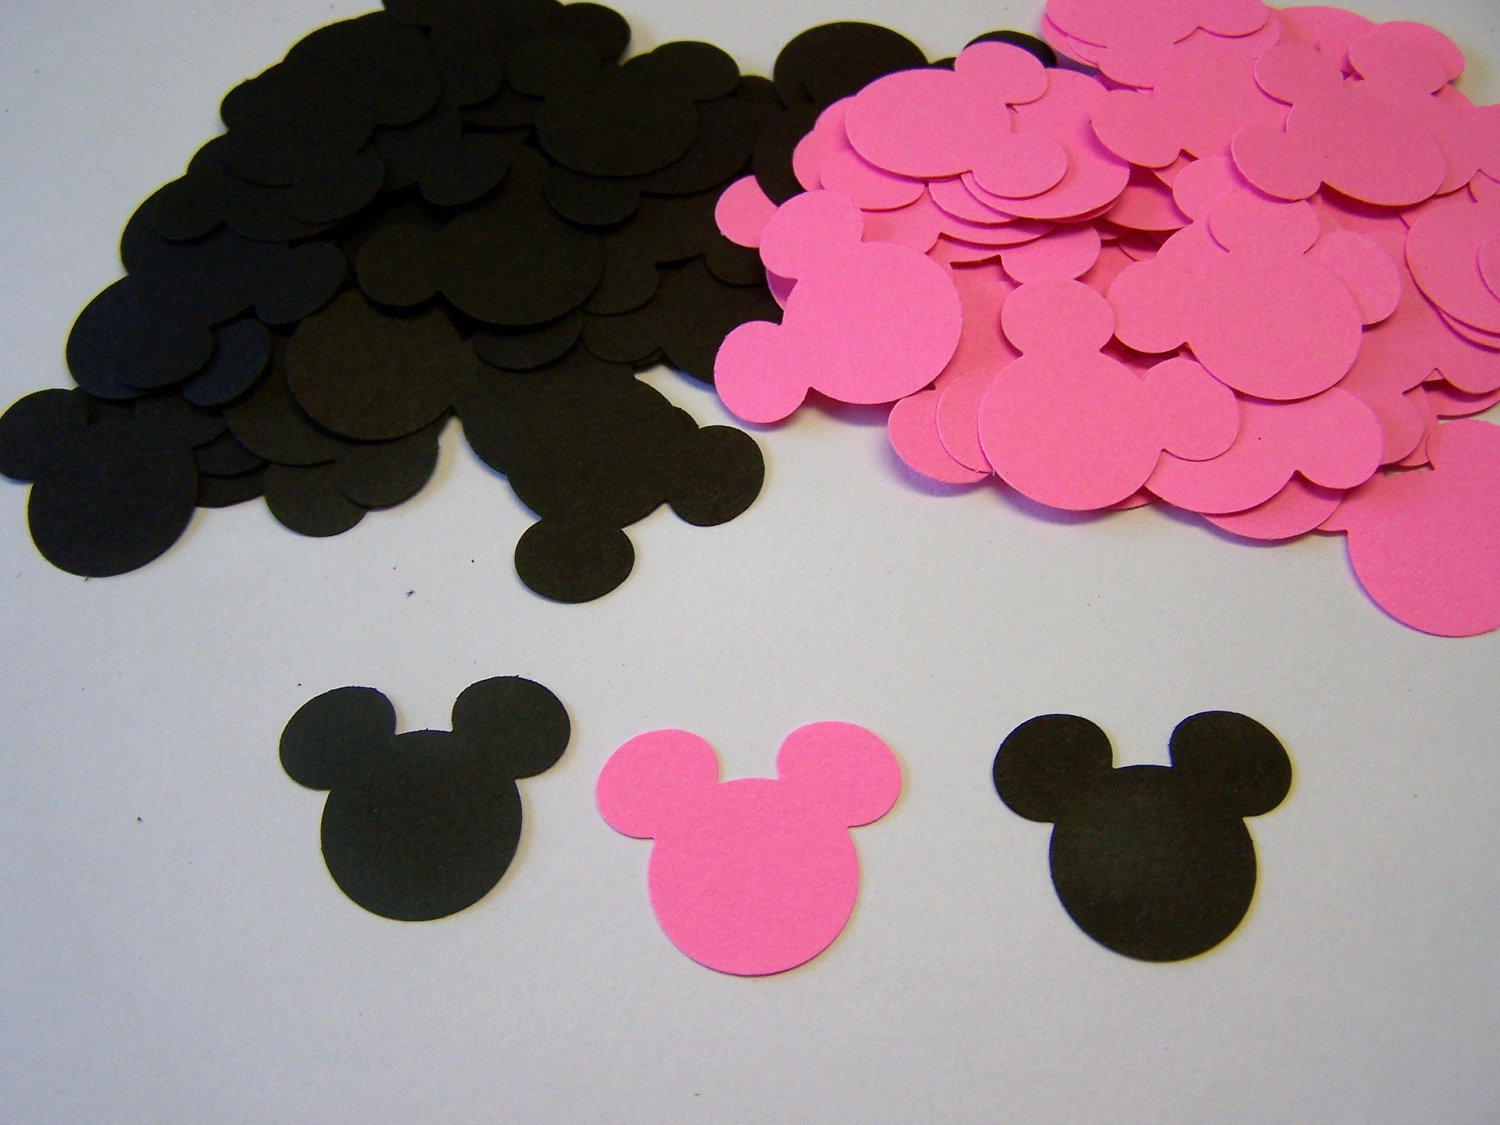 Popular items for minnie mouse diecuts on Etsy